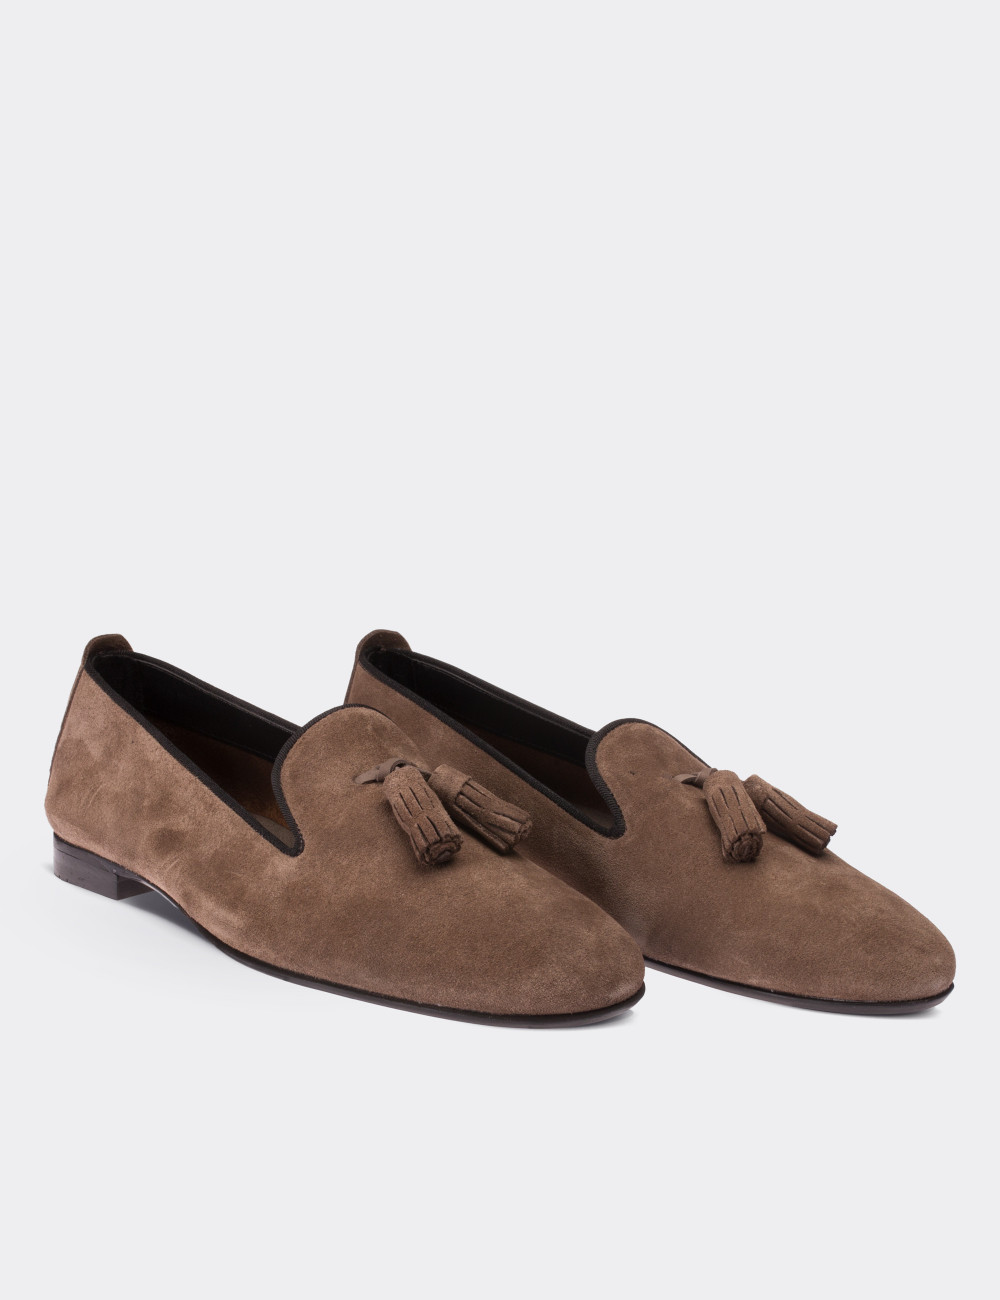 Sandstone Suede Leather Loafers - 01613ZVZNM01